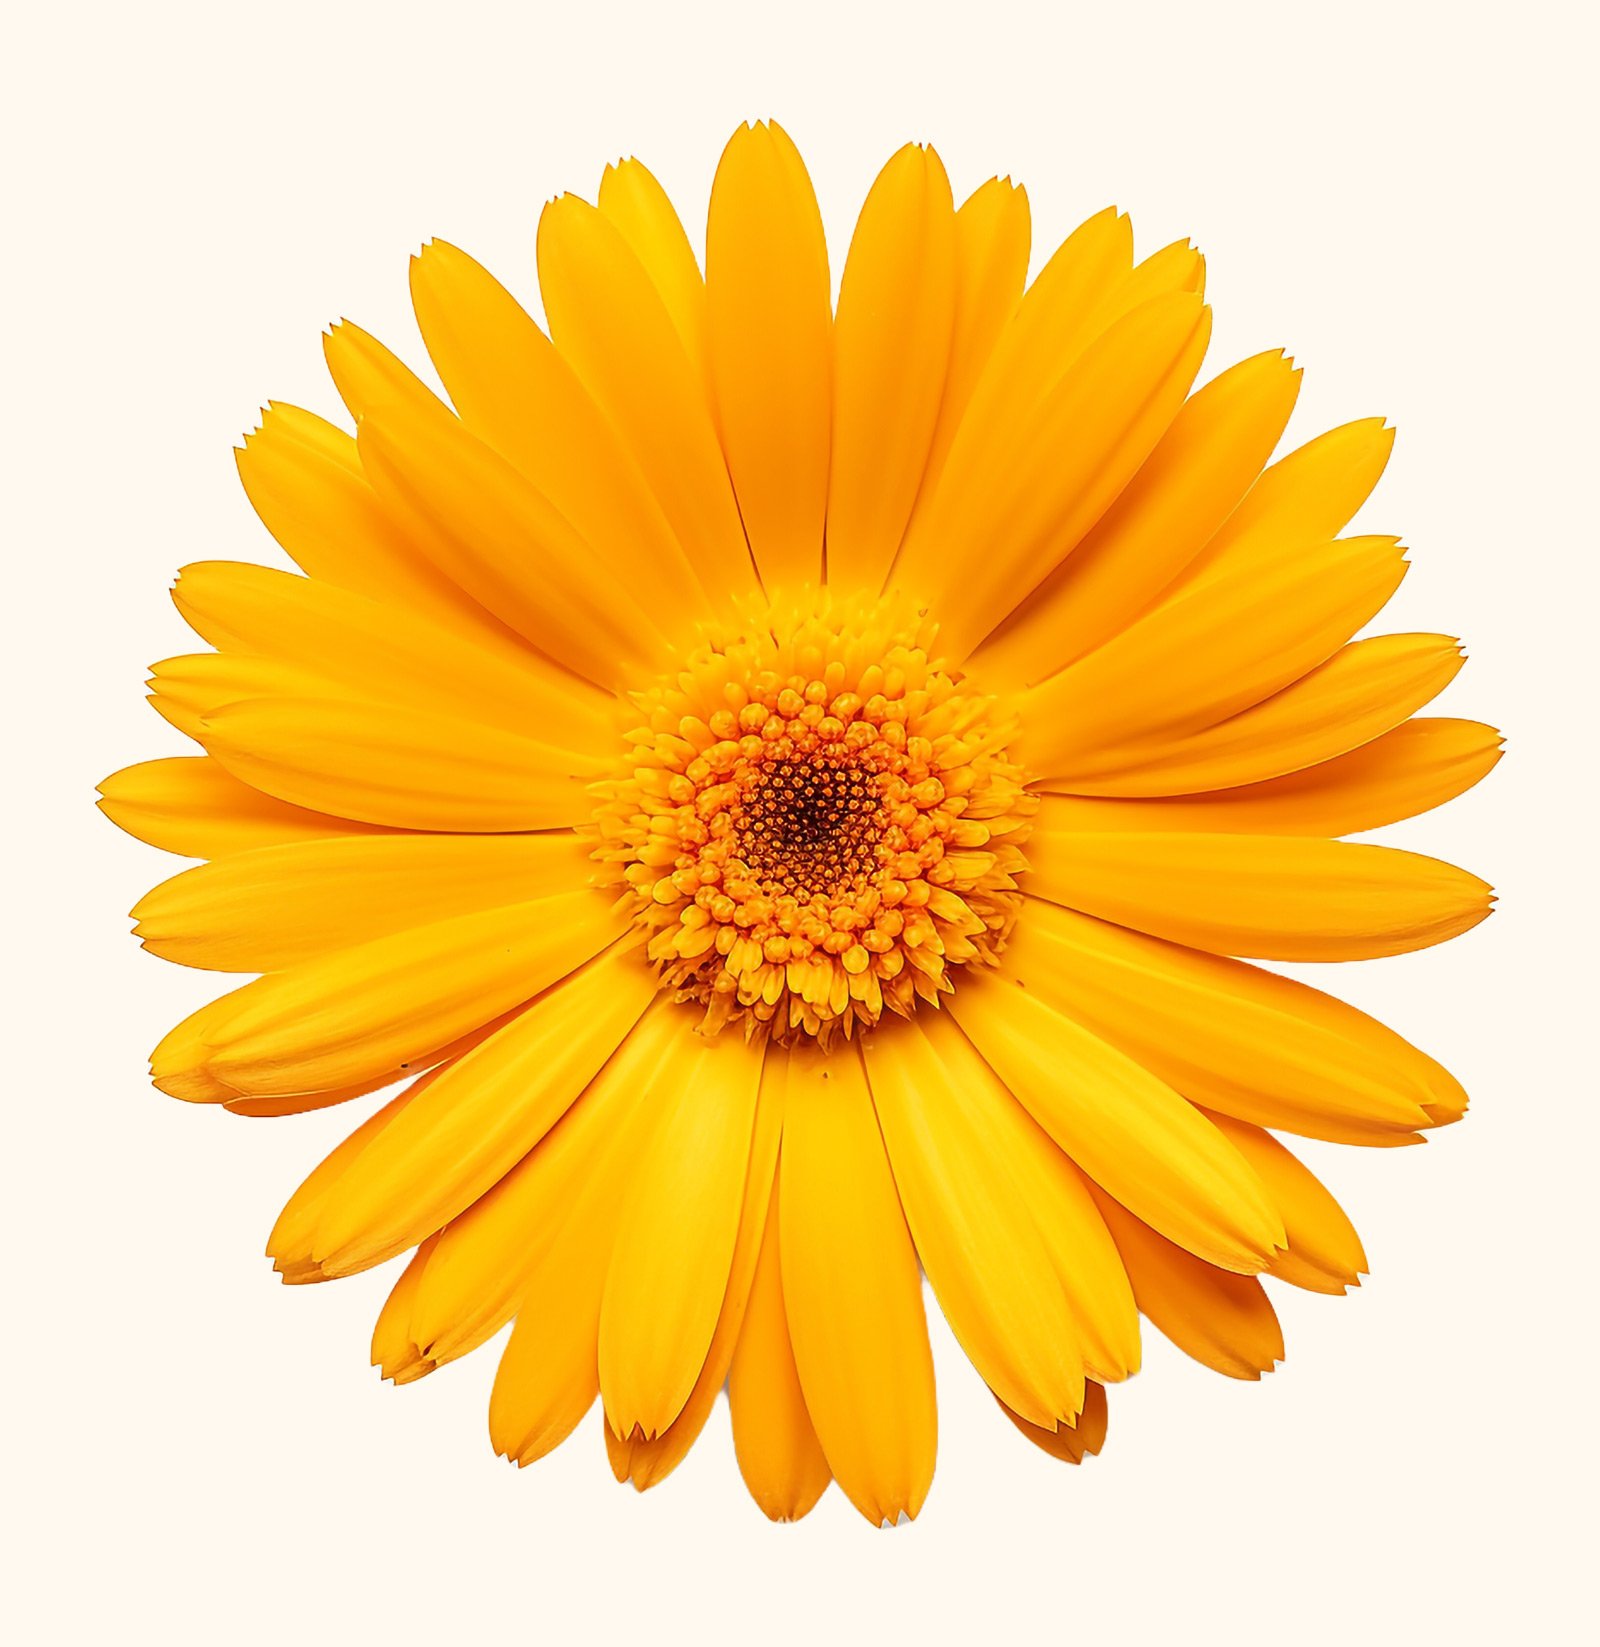 arnica ingredient in the cream